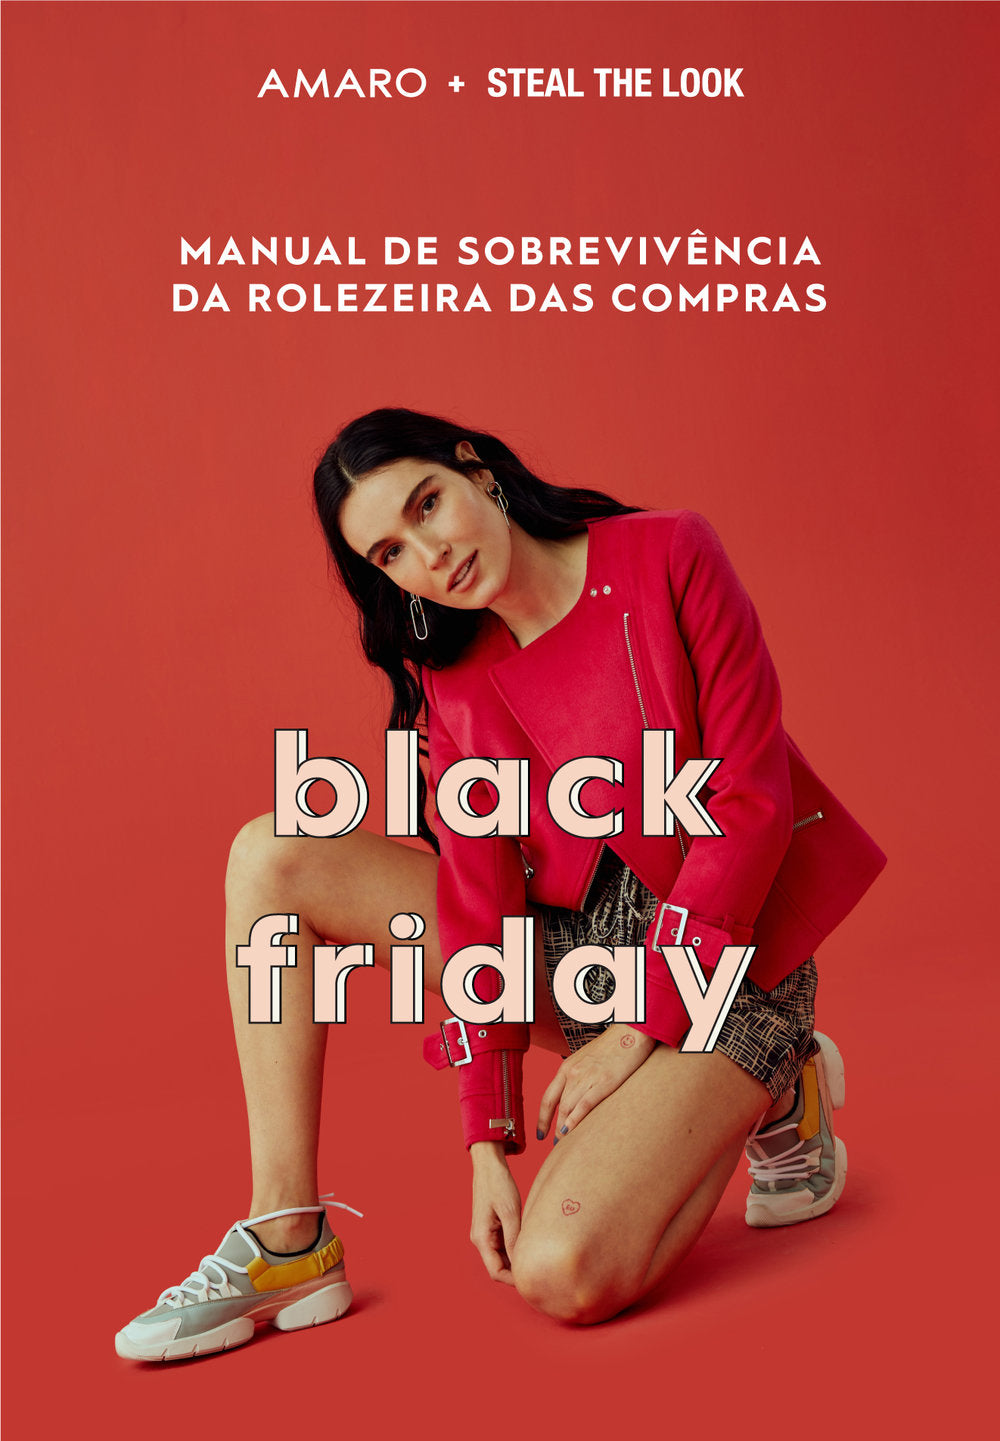 guia-black-friday-amaro-steal-the-look